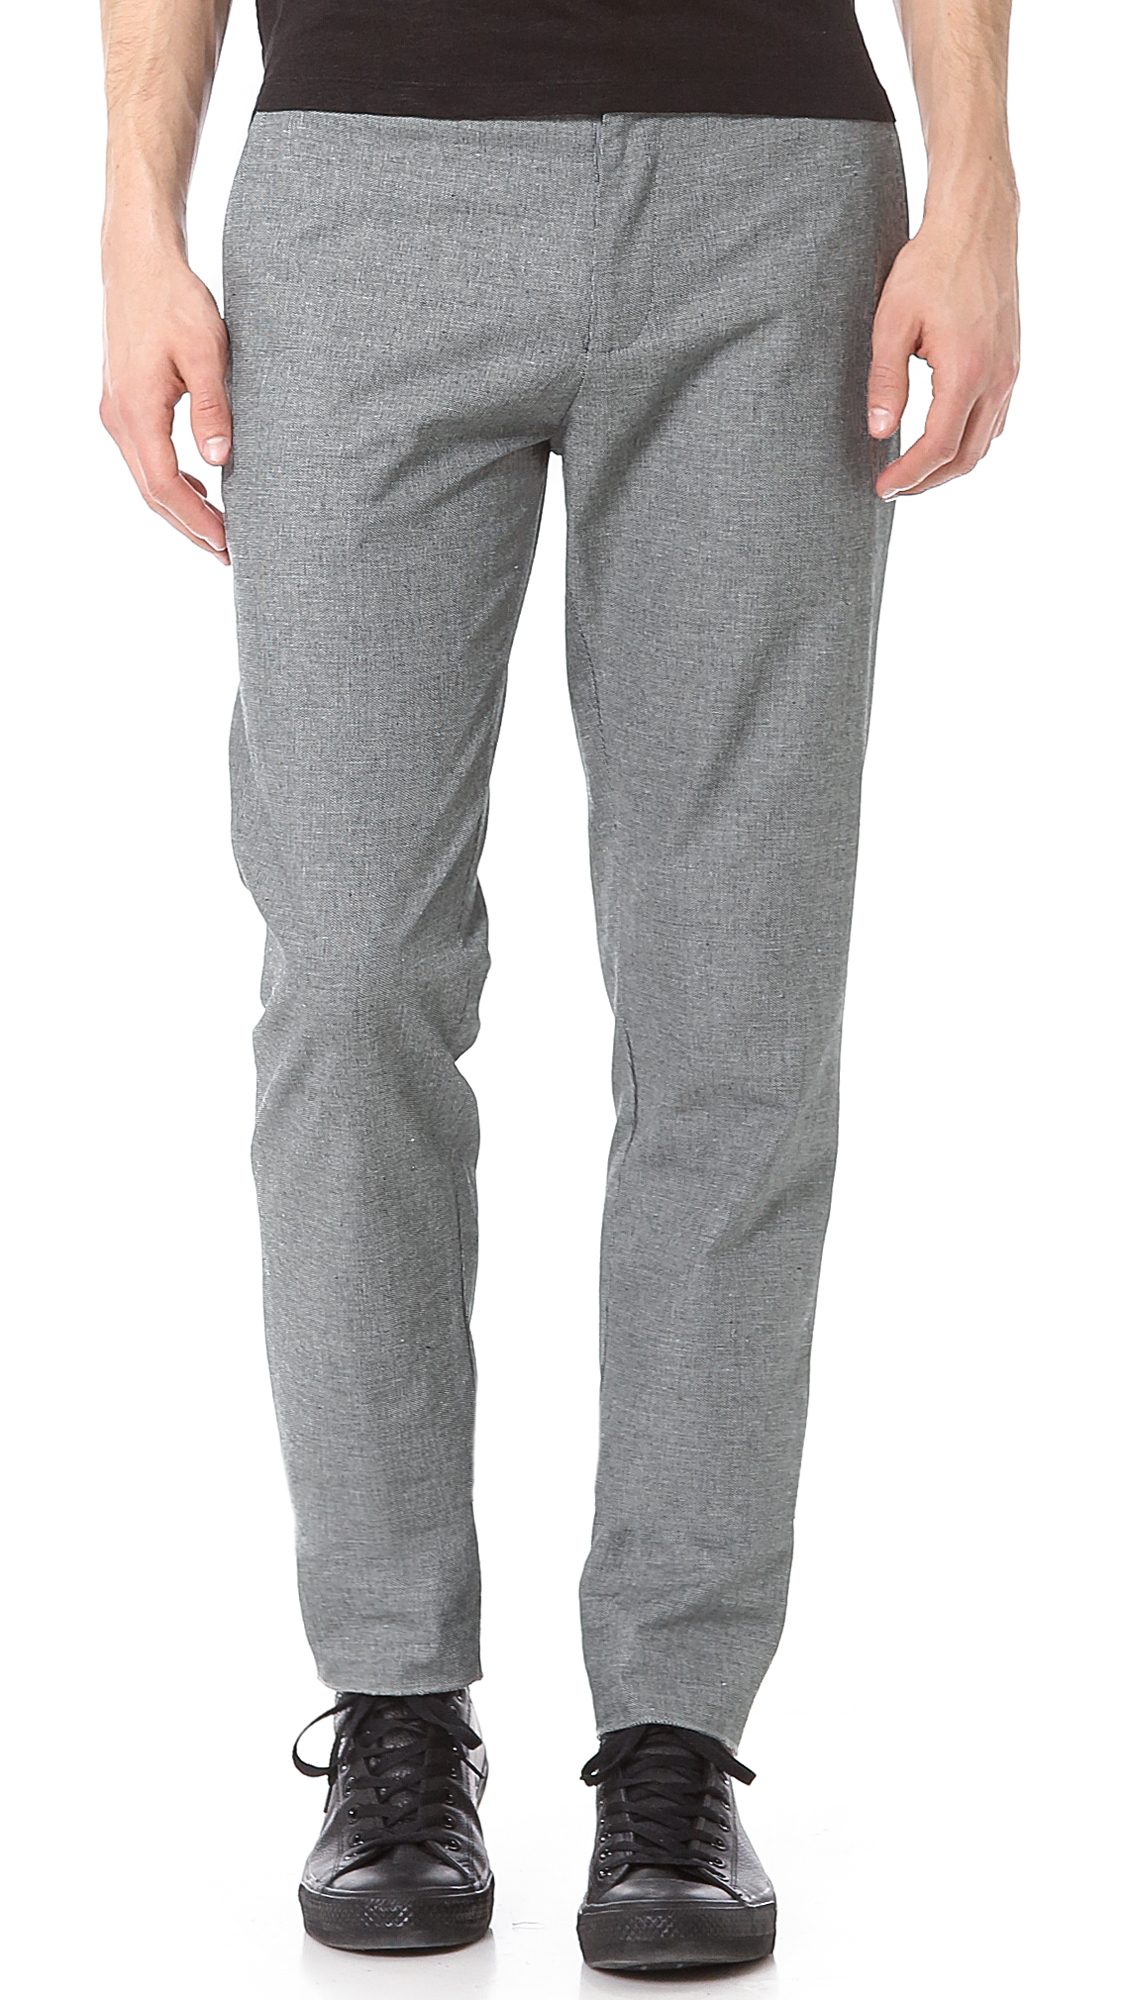 Lyst - Shades Of Grey By Micah Cohen Slim Fit Suit Pants in Gray for Men